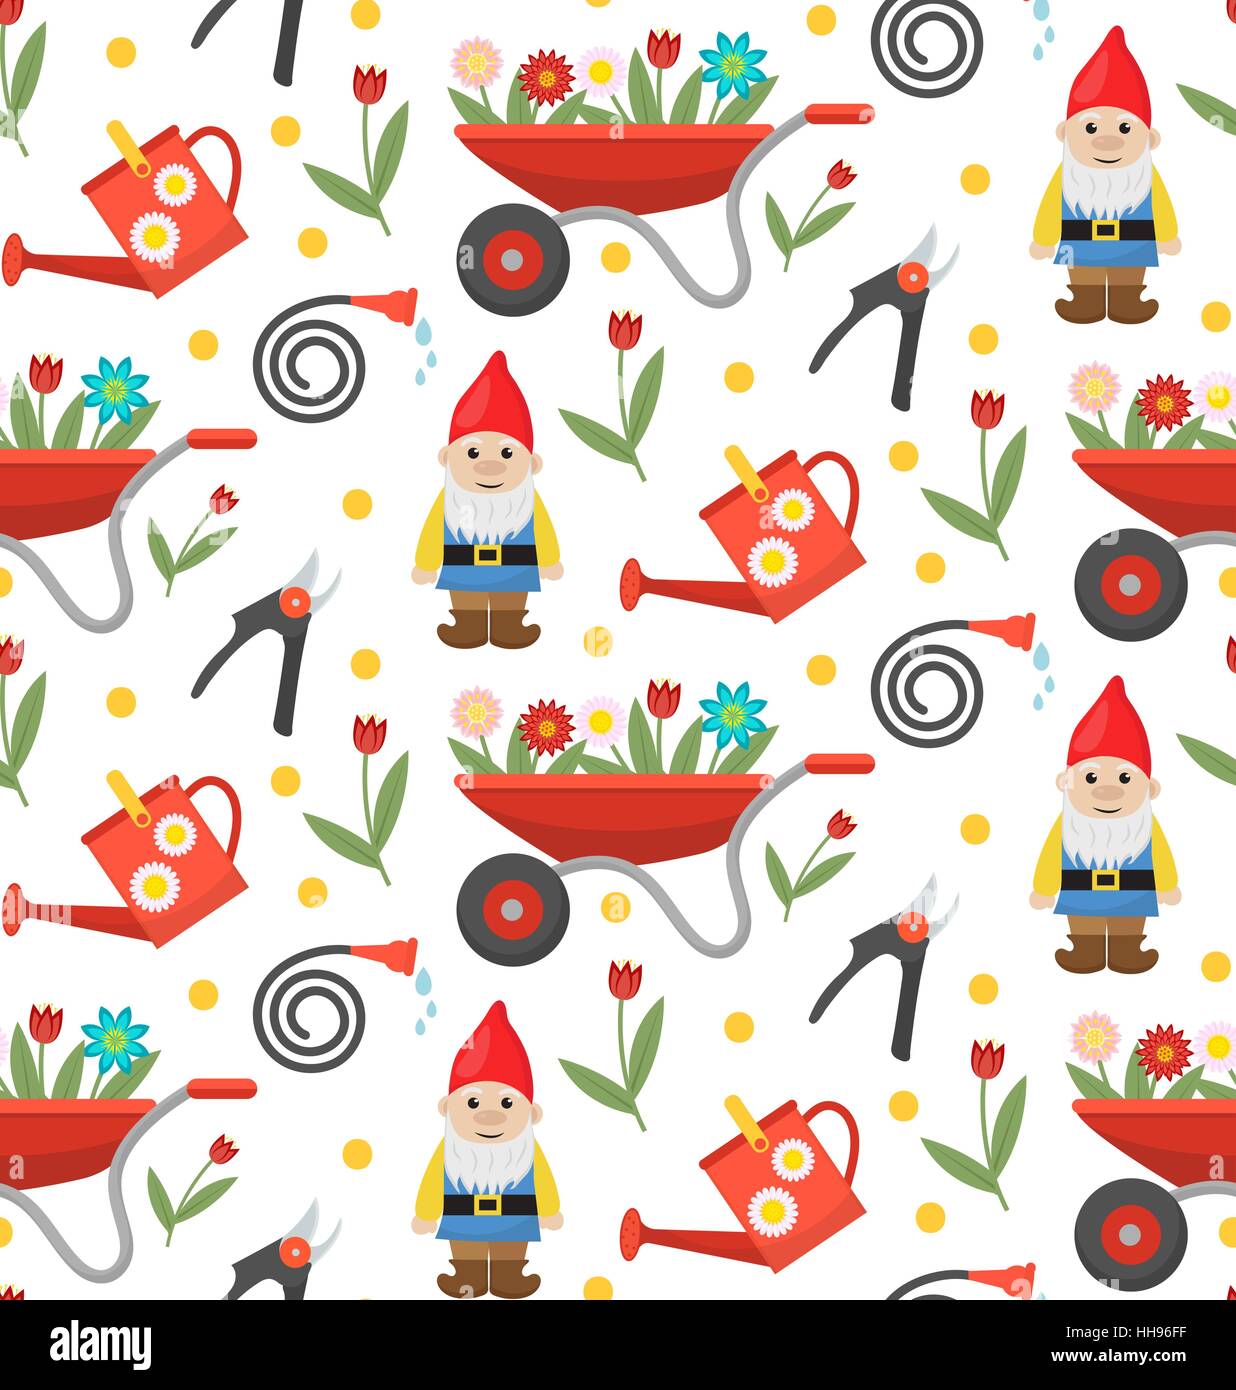 Pin by Tammy Byrer on Gnomes  Gnome wallpaper Gnome pictures Gnome paint